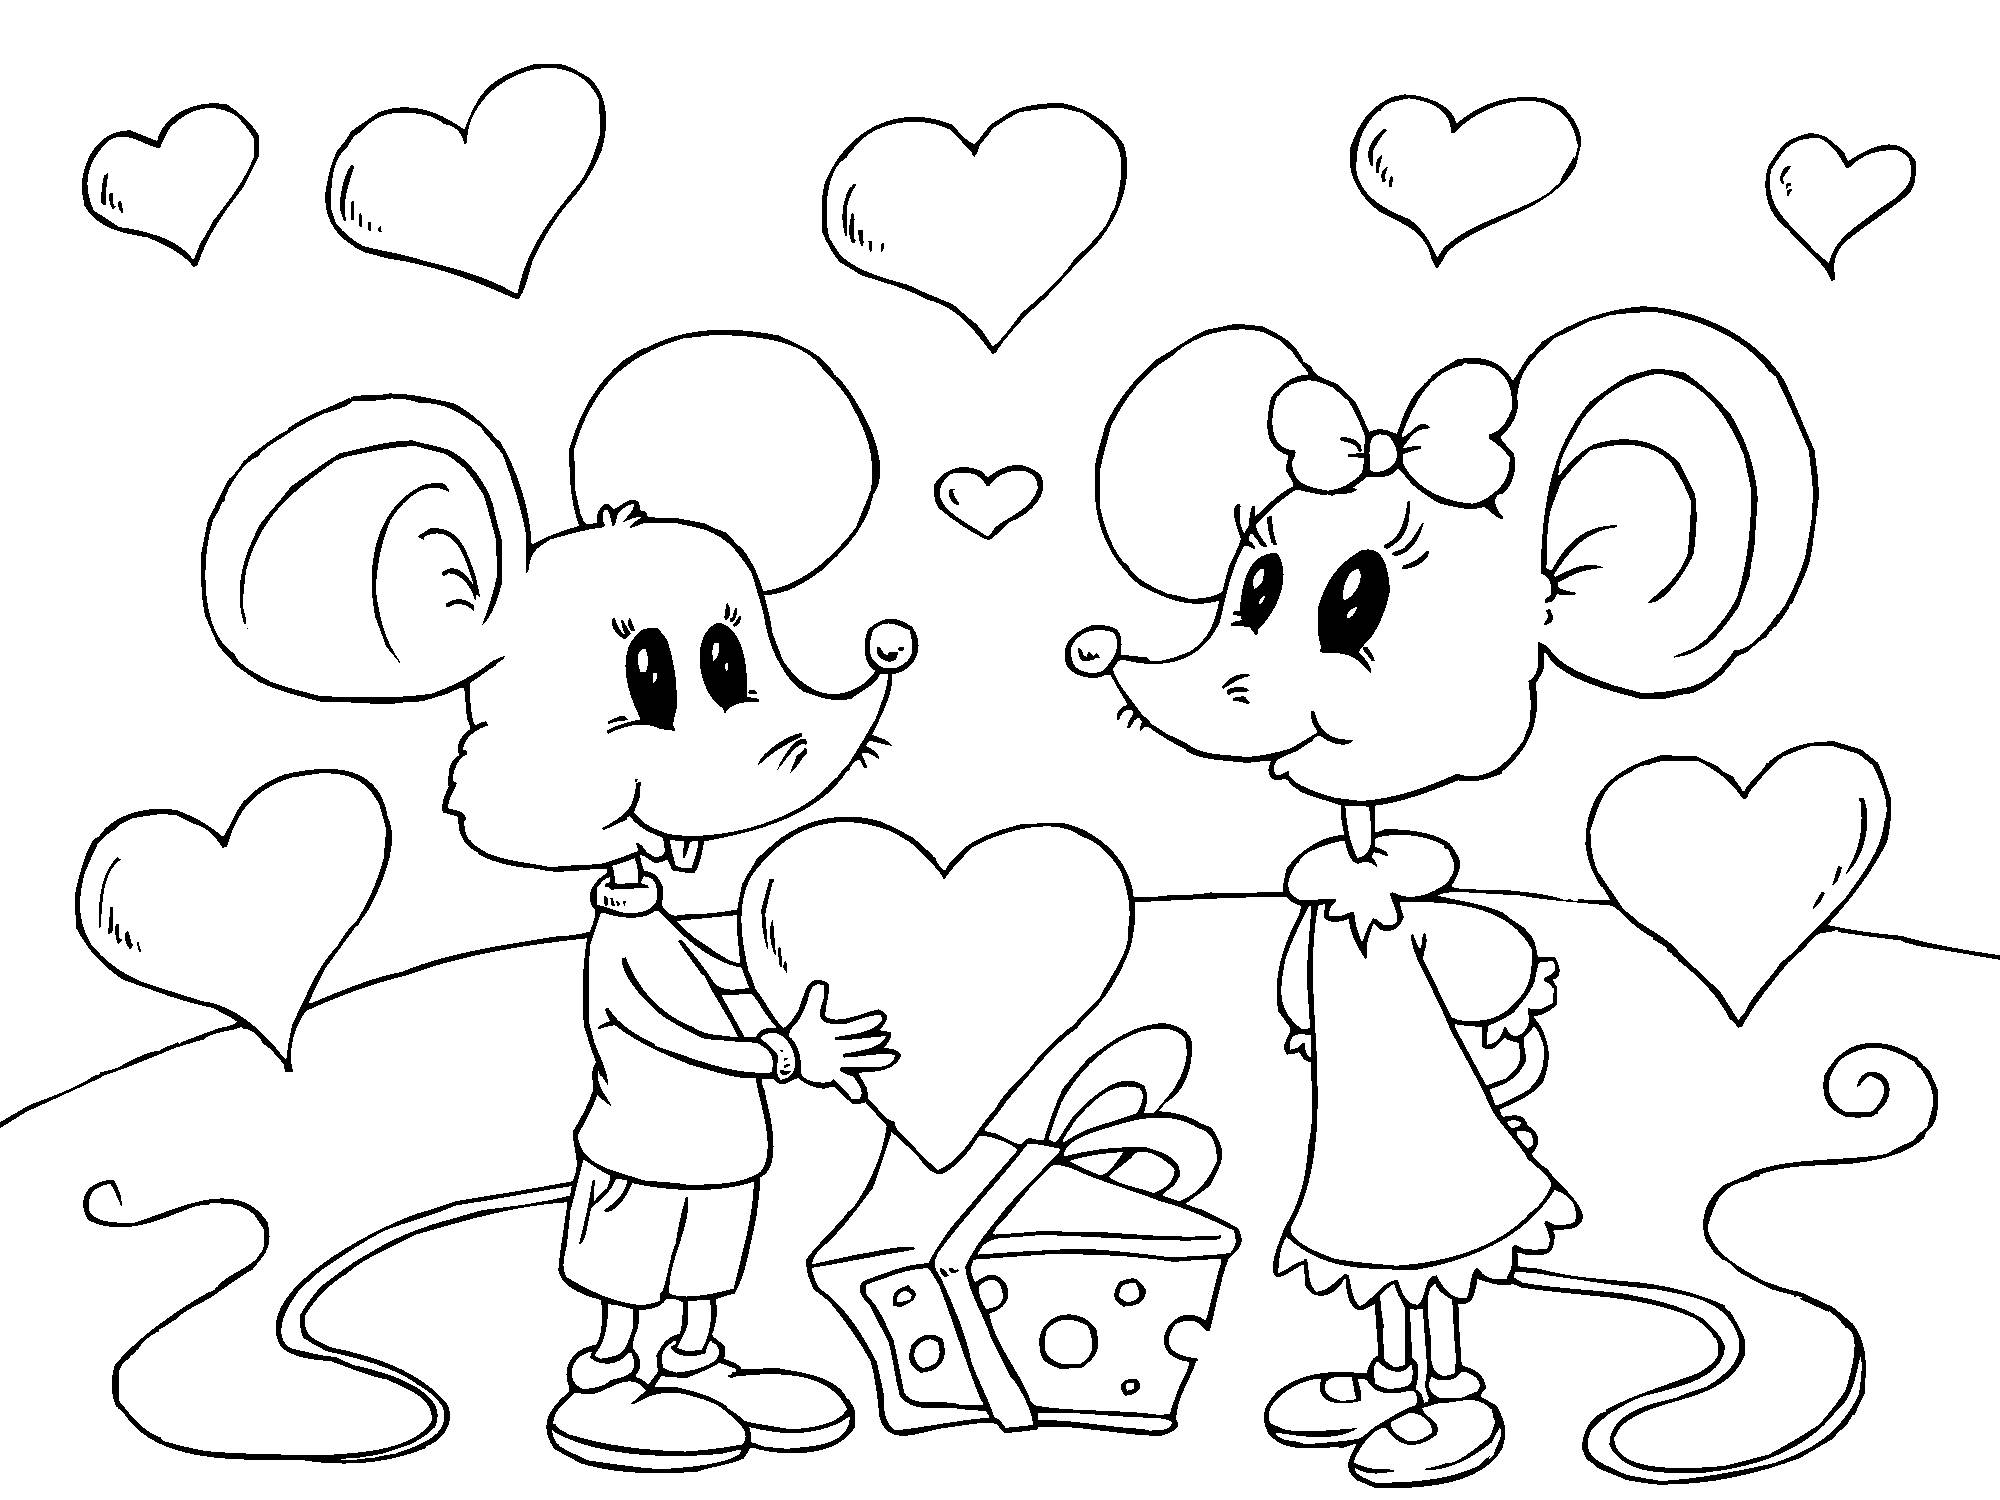 Happy valentine's day mouse